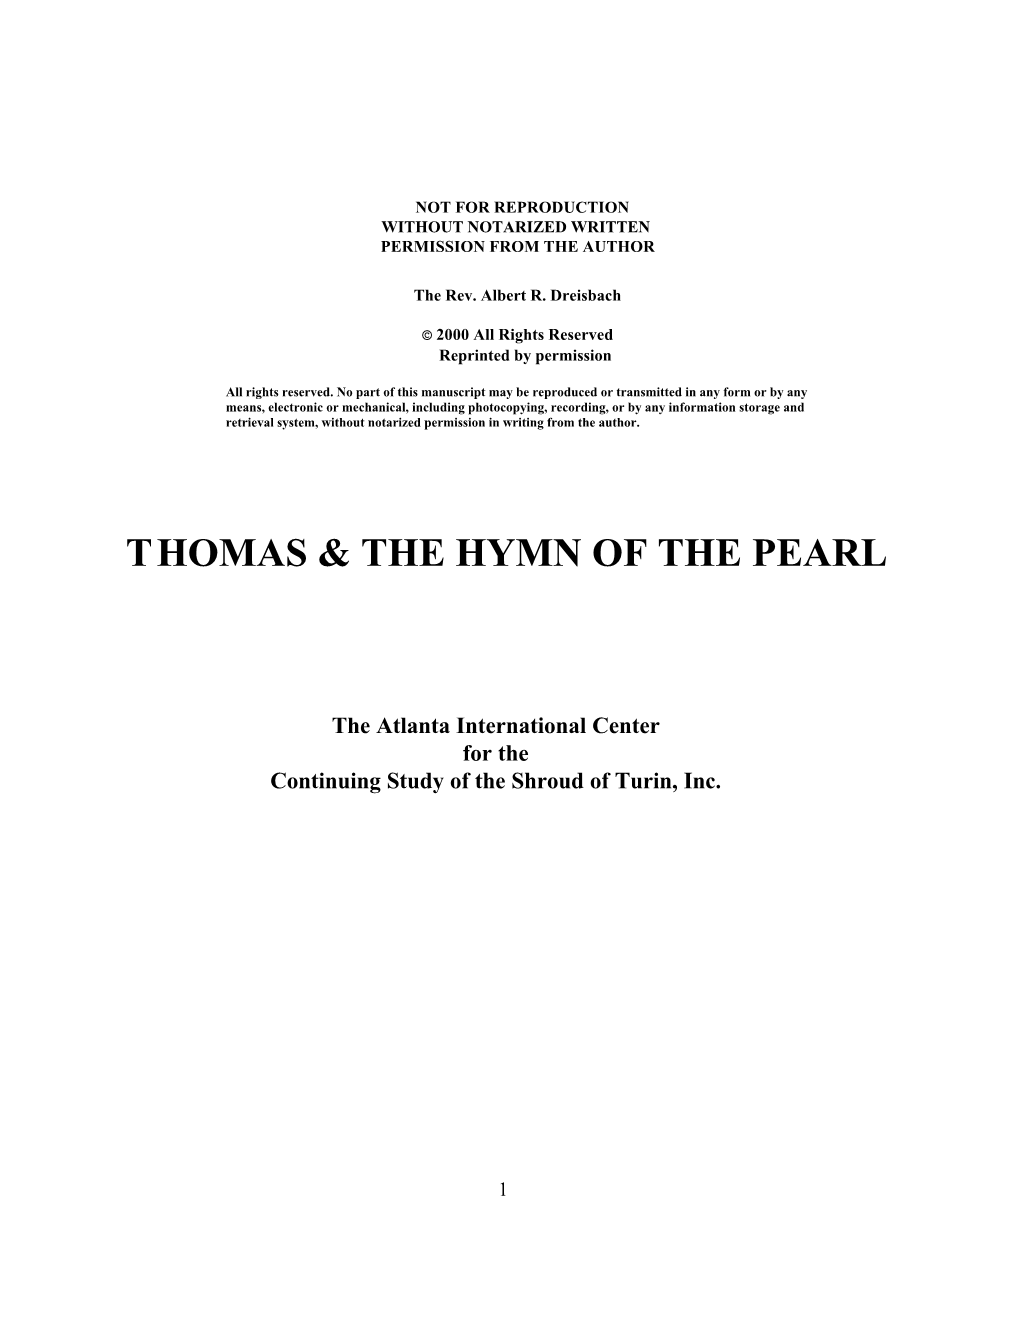 Thomas & the Hymn of the Pearl